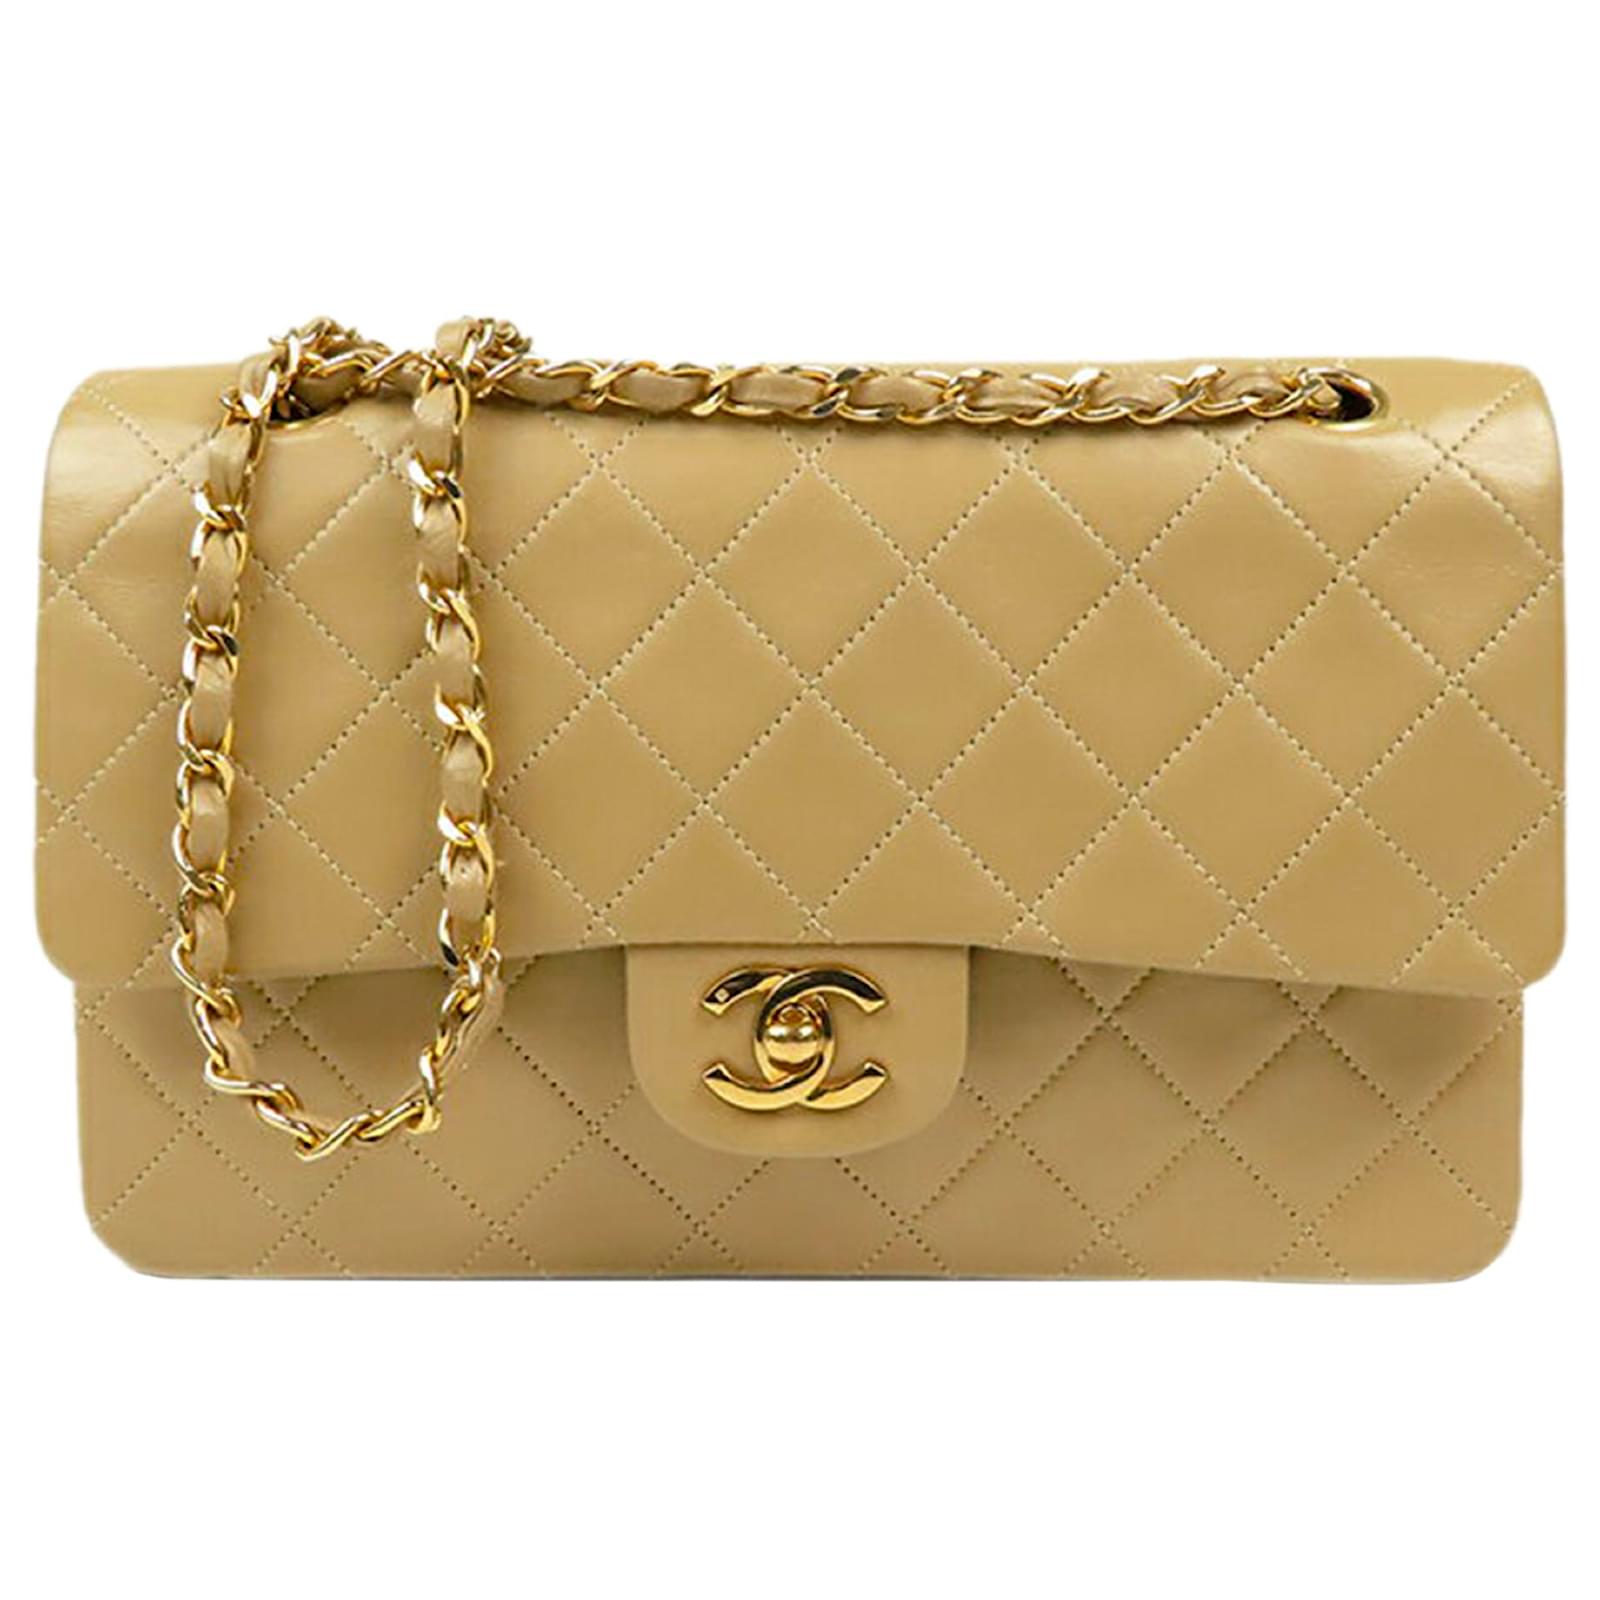 Chanel Brown Medium Classic Lambskin Leather lined Flap Bag Beige